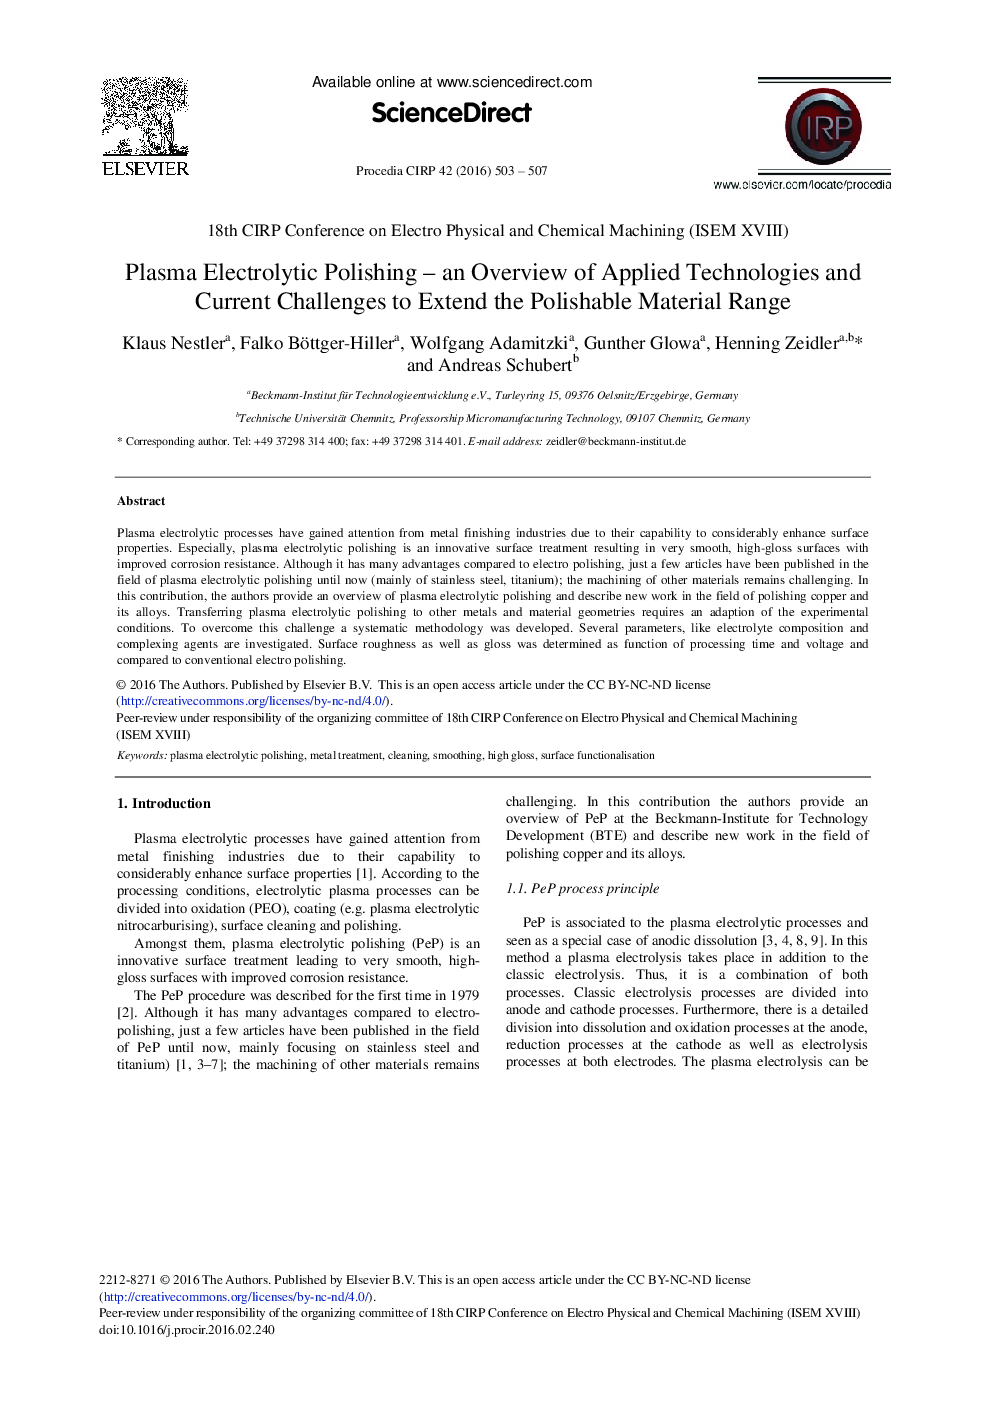 Plasma Electrolytic Polishing – An Overview of Applied Technologies and Current Challenges to Extend the Polishable Material Range 